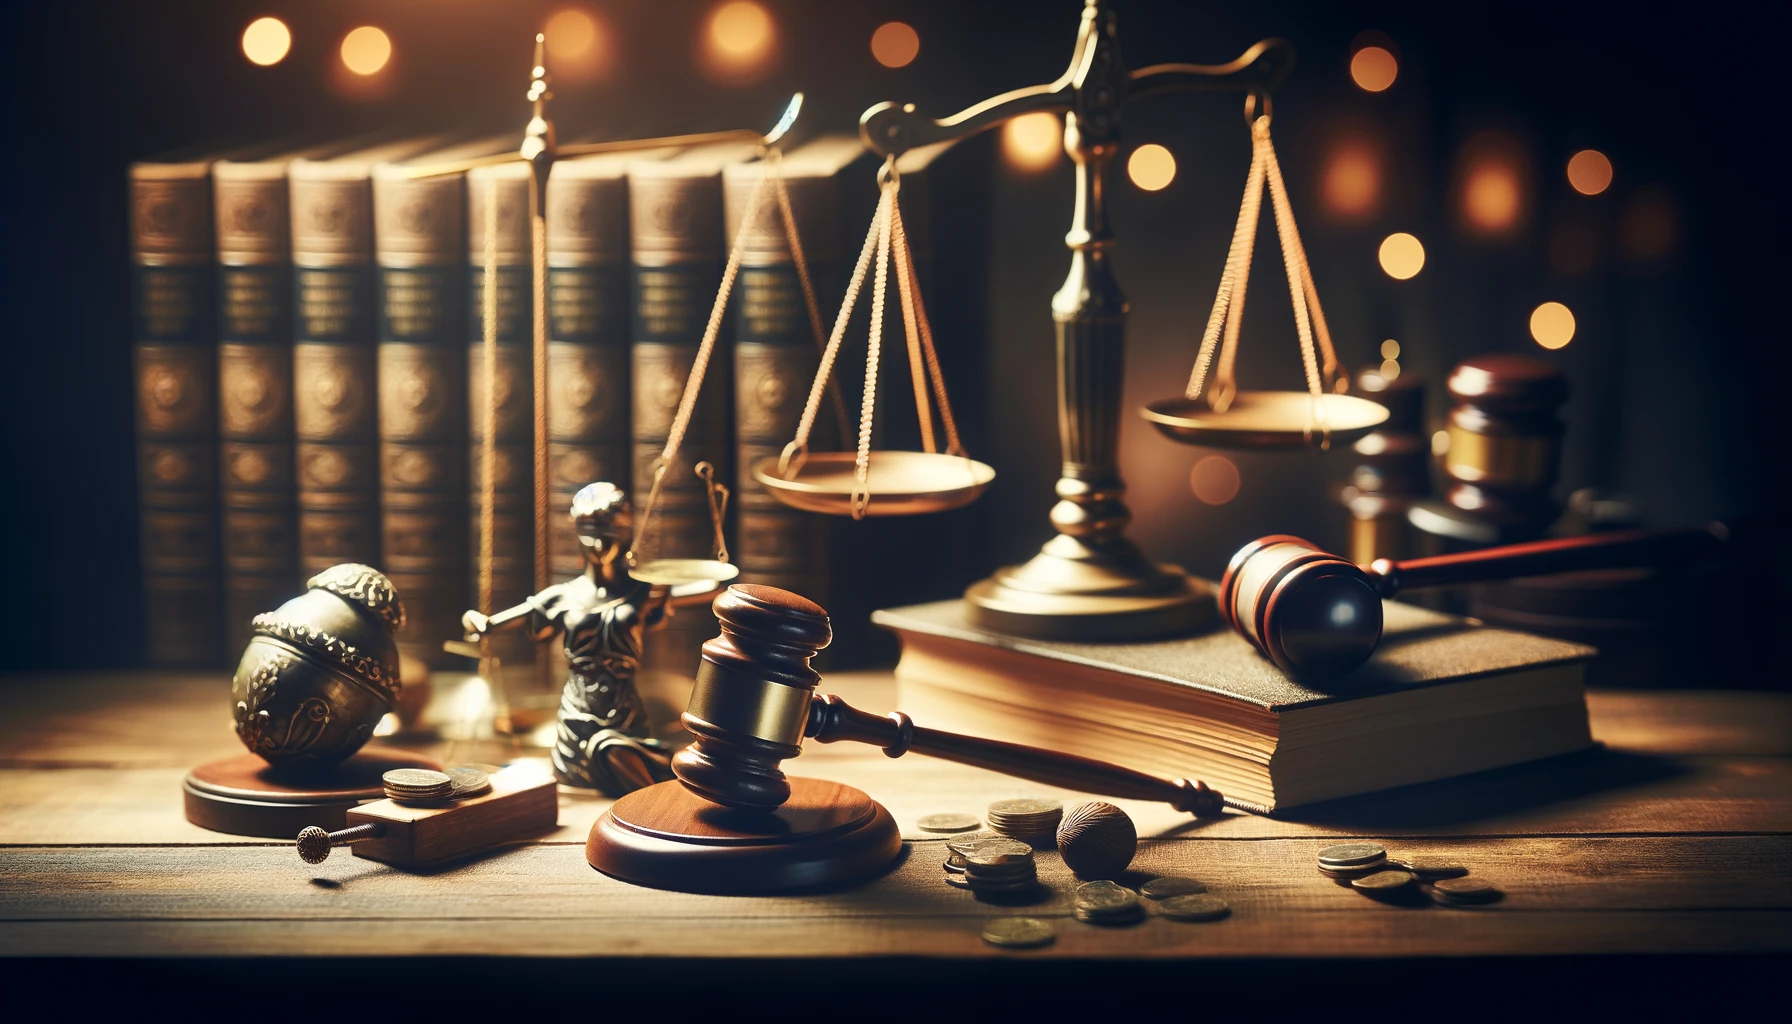 DALL·E 2024-06-11 23.02.14 - A high-quality, realistic image of a law-themed still life. The scene includes a balanced scale of justice, a gavel, law books, and other legal symbol